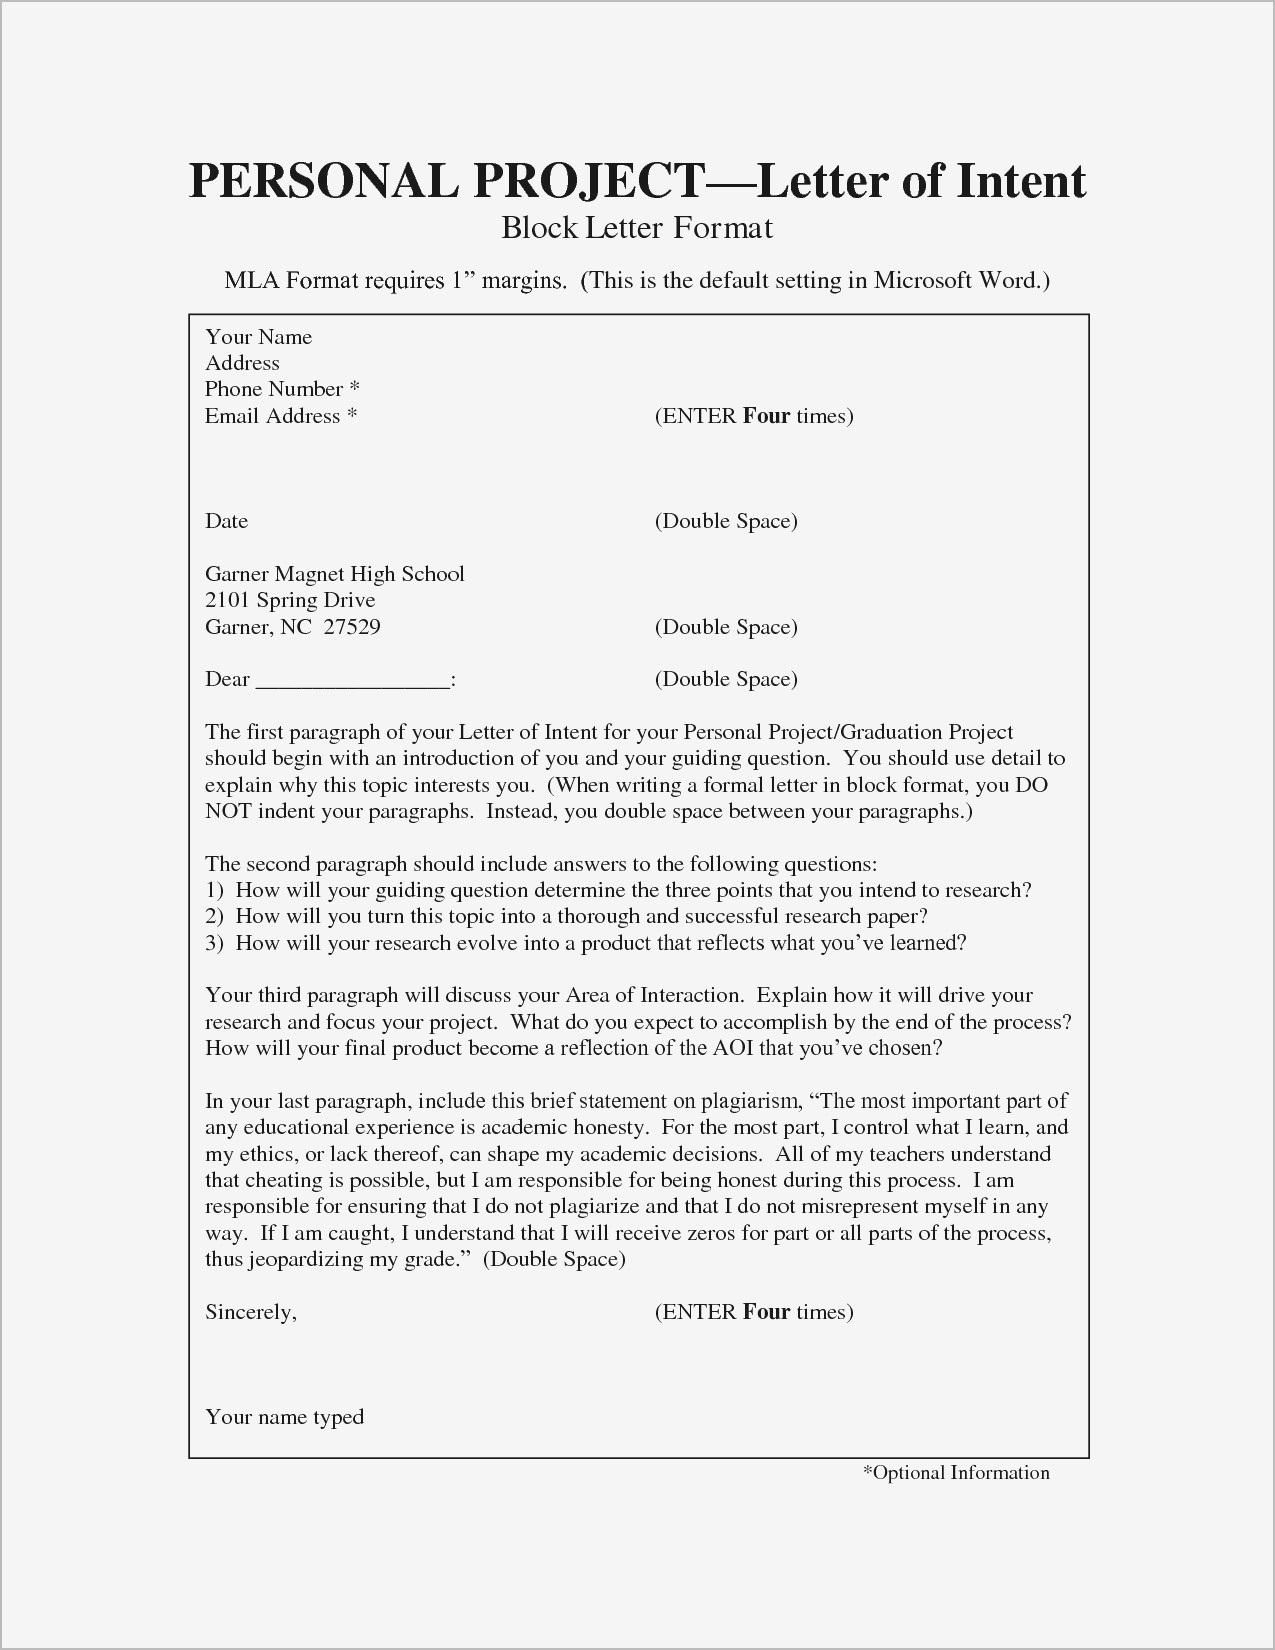 Letter Of Intent Template Word - Inspirational Letter Templates